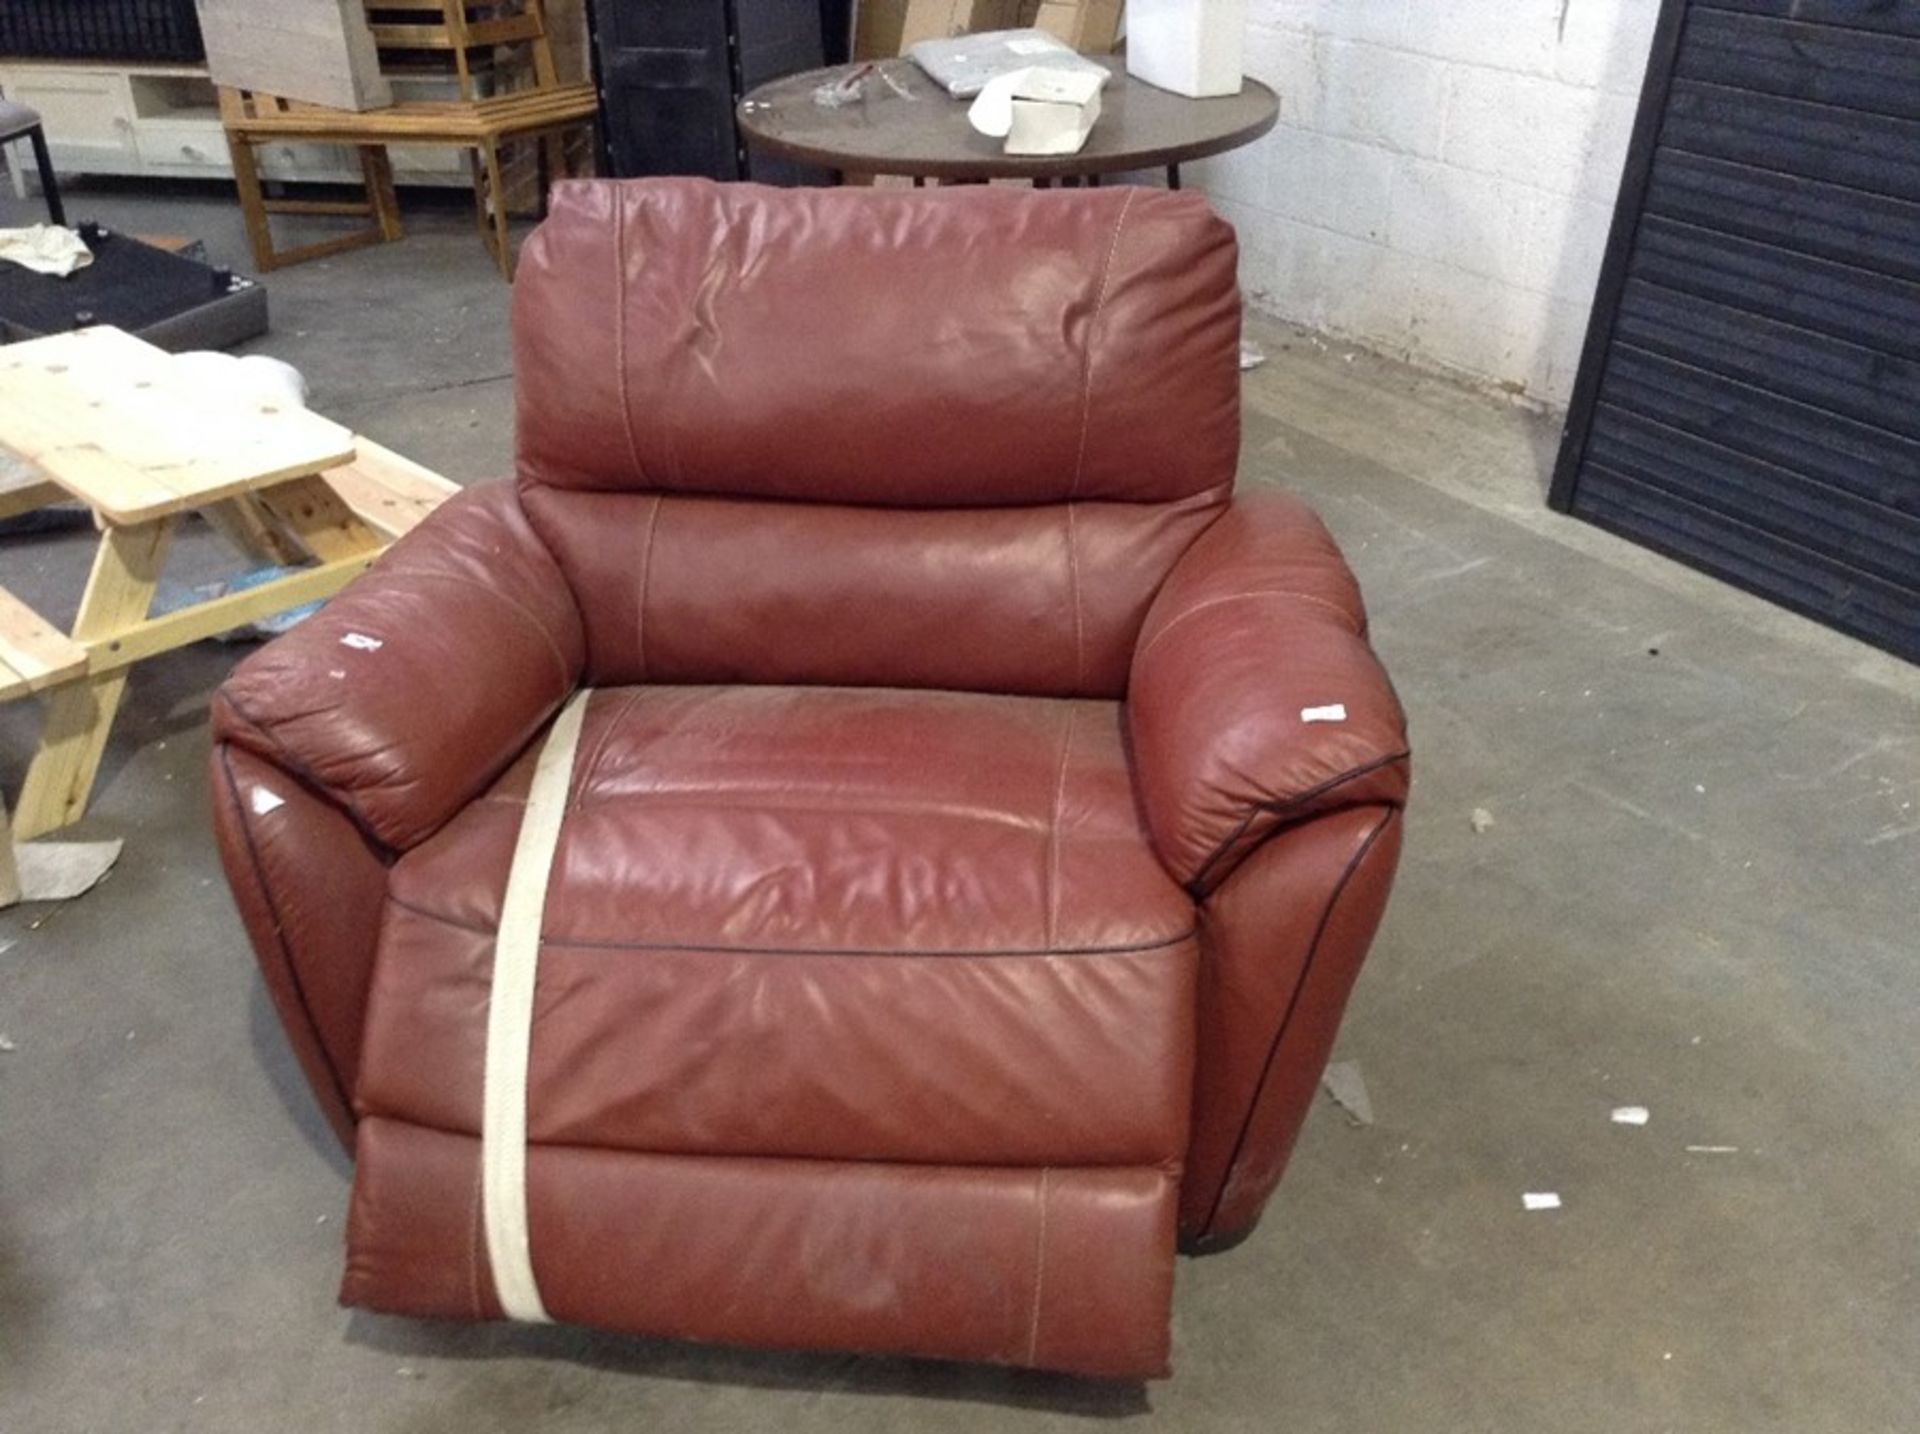 RED LEATHER MANUAL RECLINING CHAIR (DAMAGE)